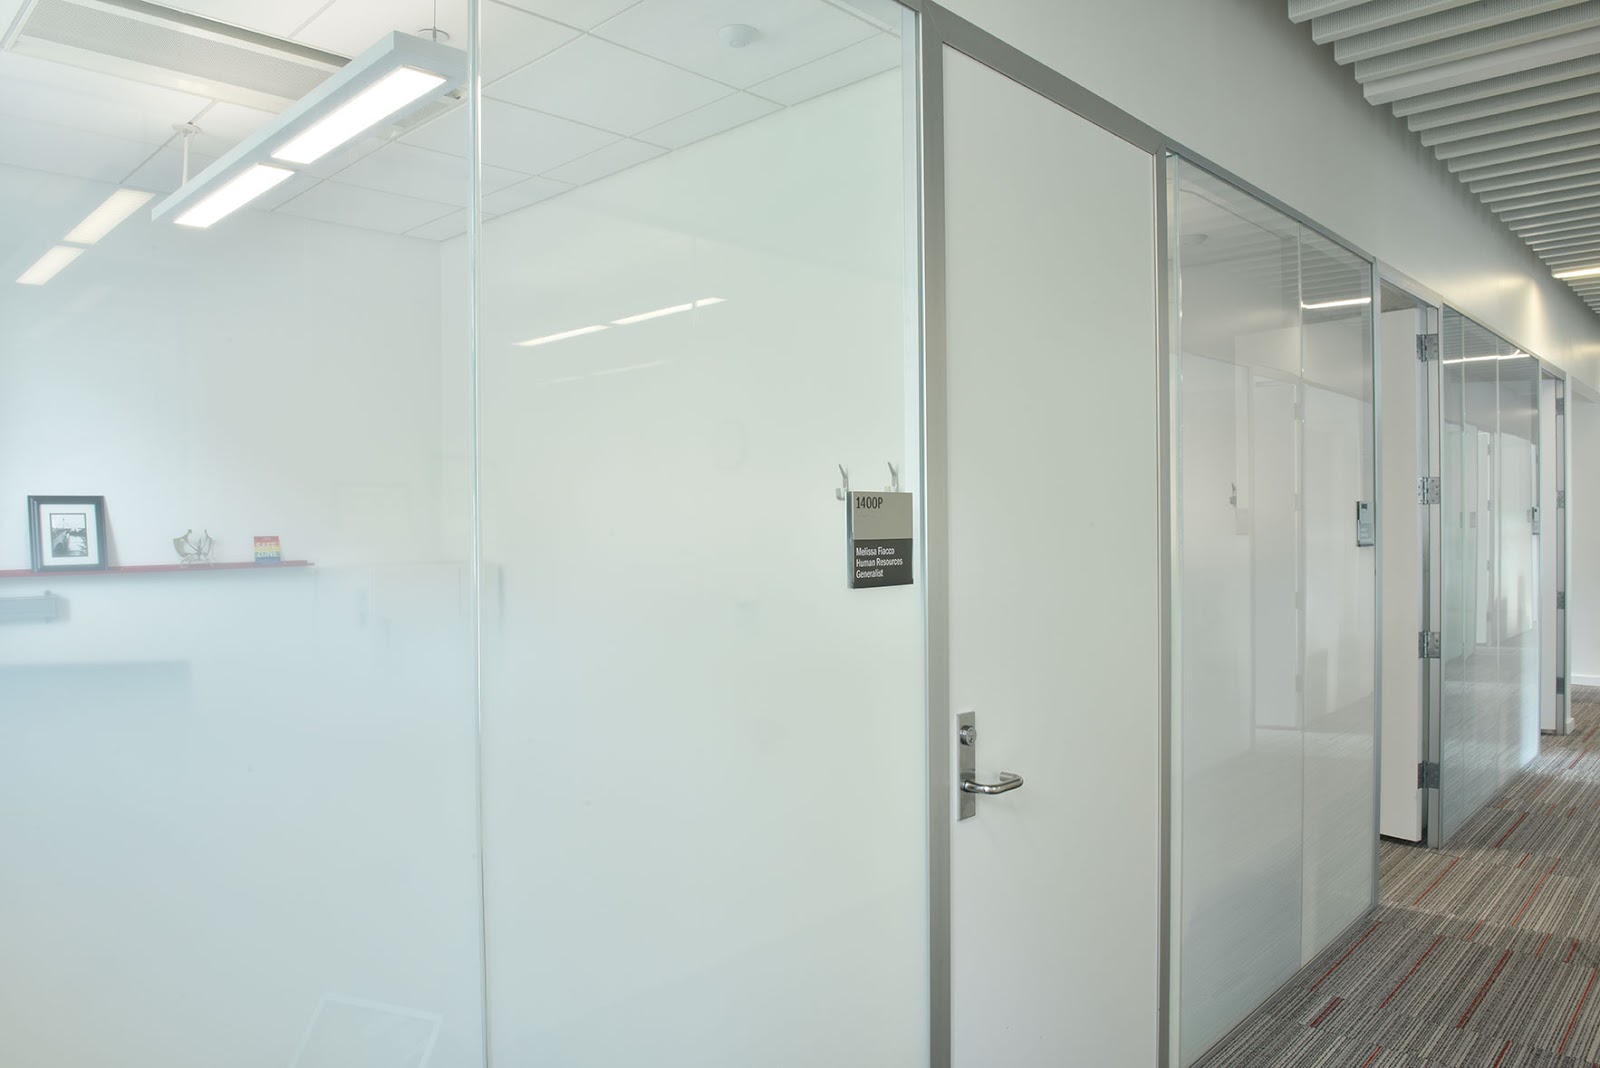 Create Cubicles With Interior Glazed Curtain Wall